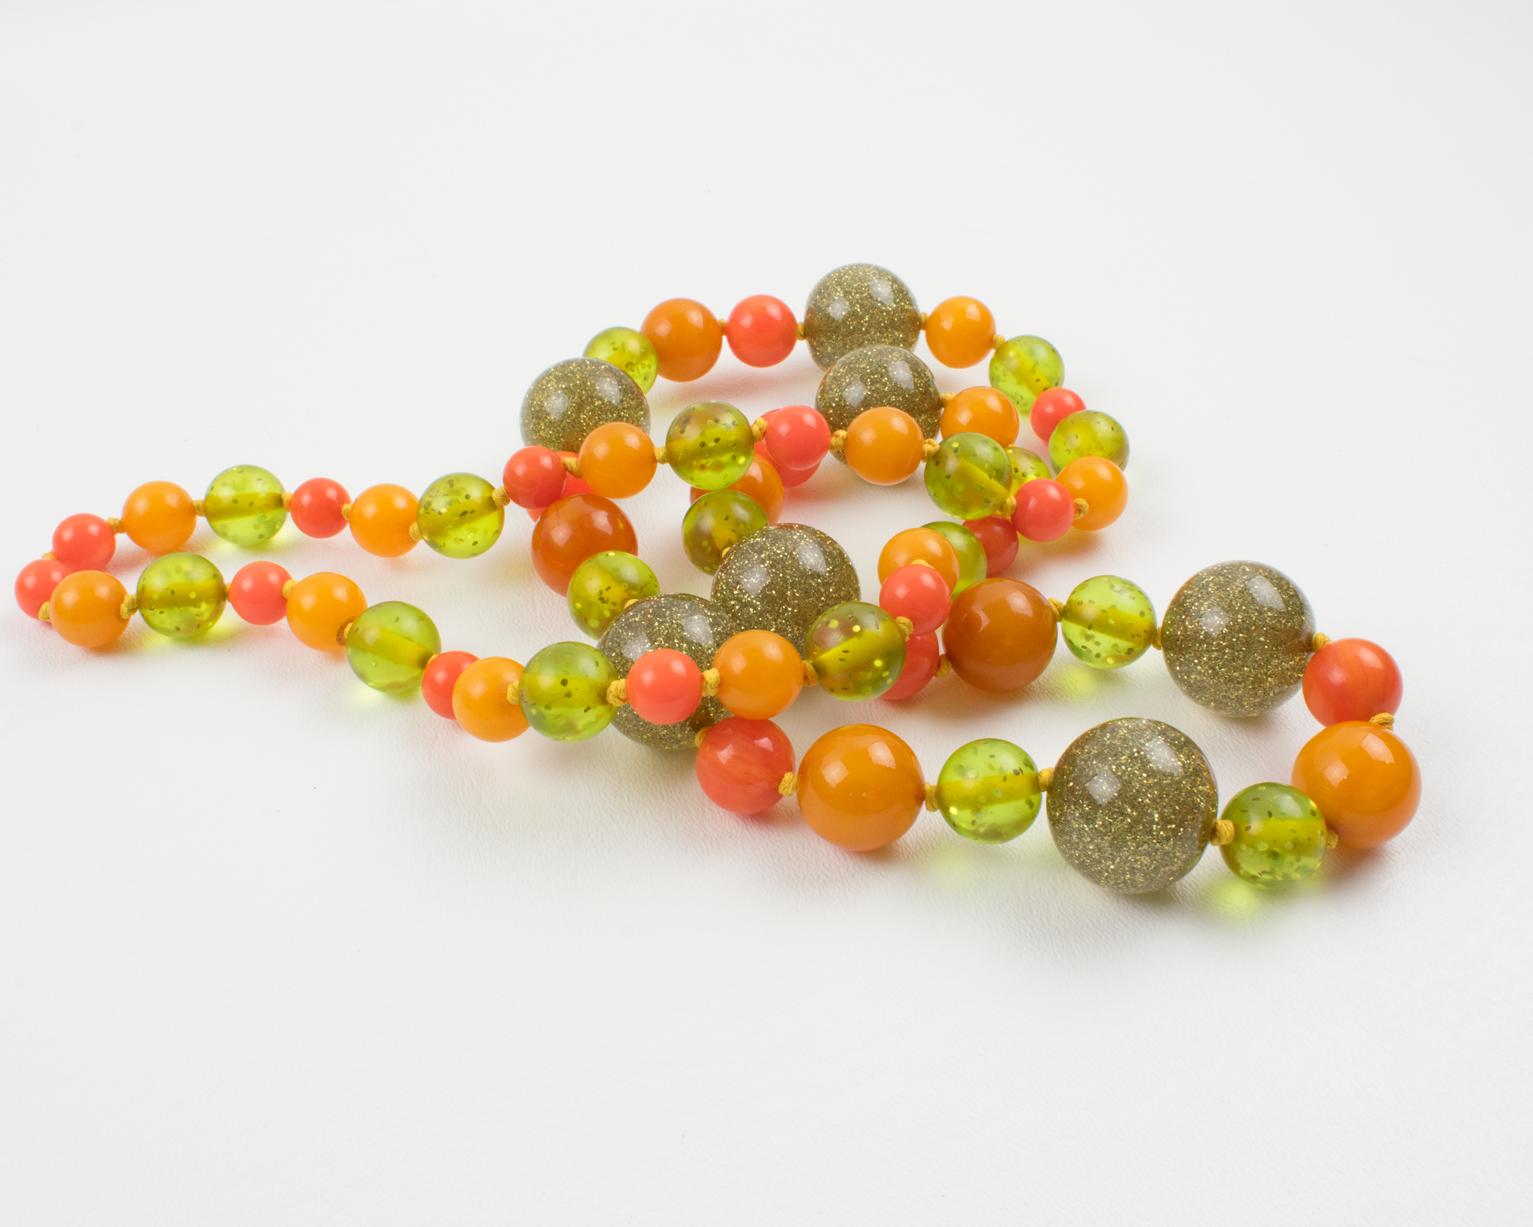 Bakelite and Lucite Extra Long Necklace with Orange, Green and Glitter Beads For Sale 5